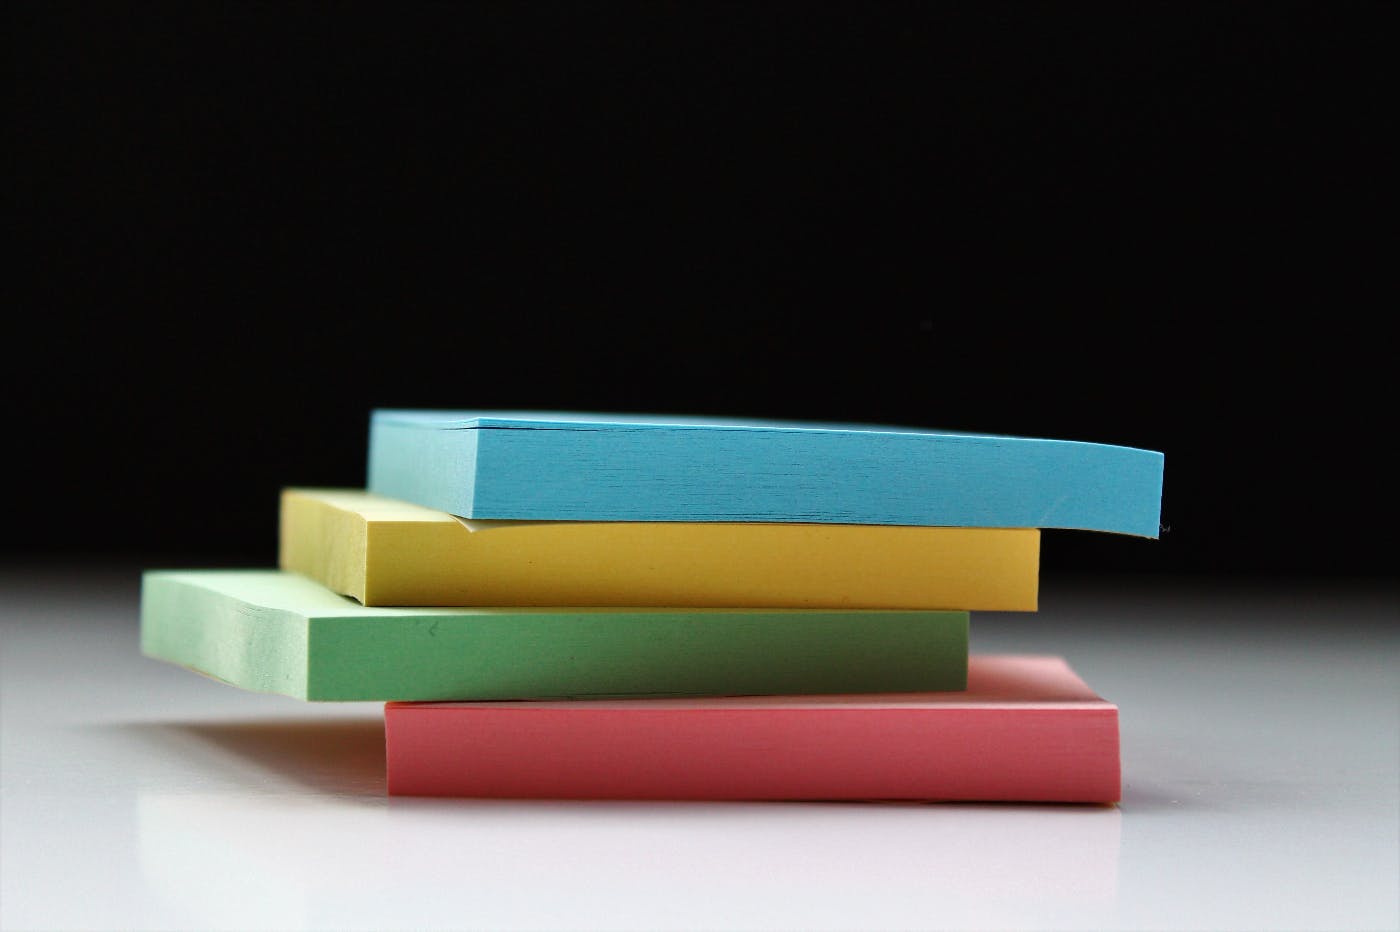 a stack of 4 packs of sticky notes in blue, yellow, green and red